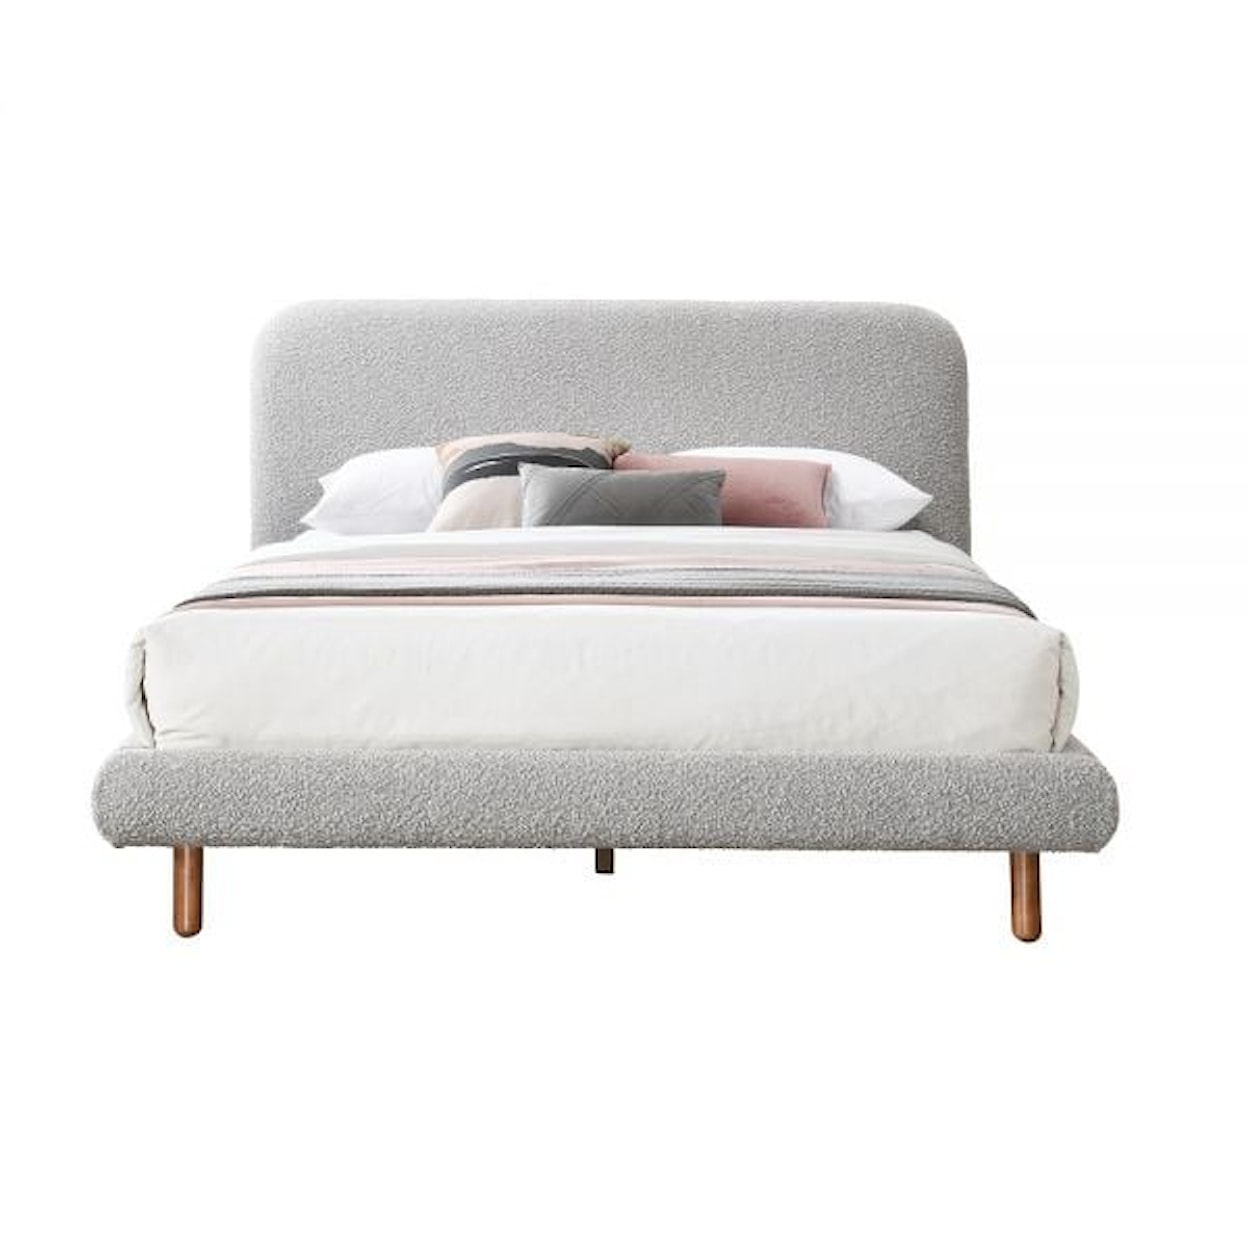 Acme Furniture Cleo King Upholstered Bed